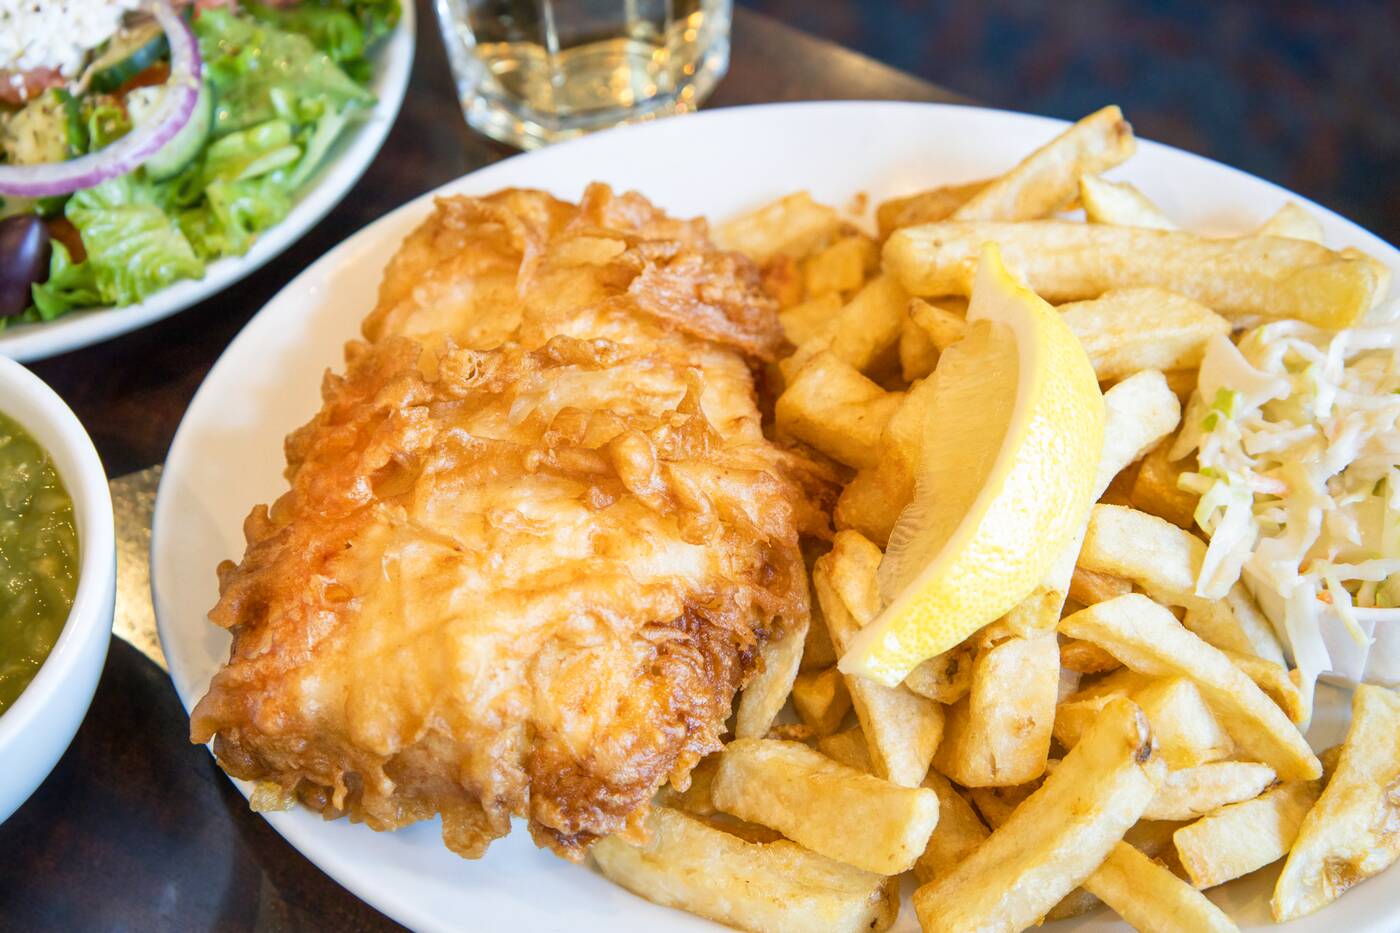 olde yorke fish and chips